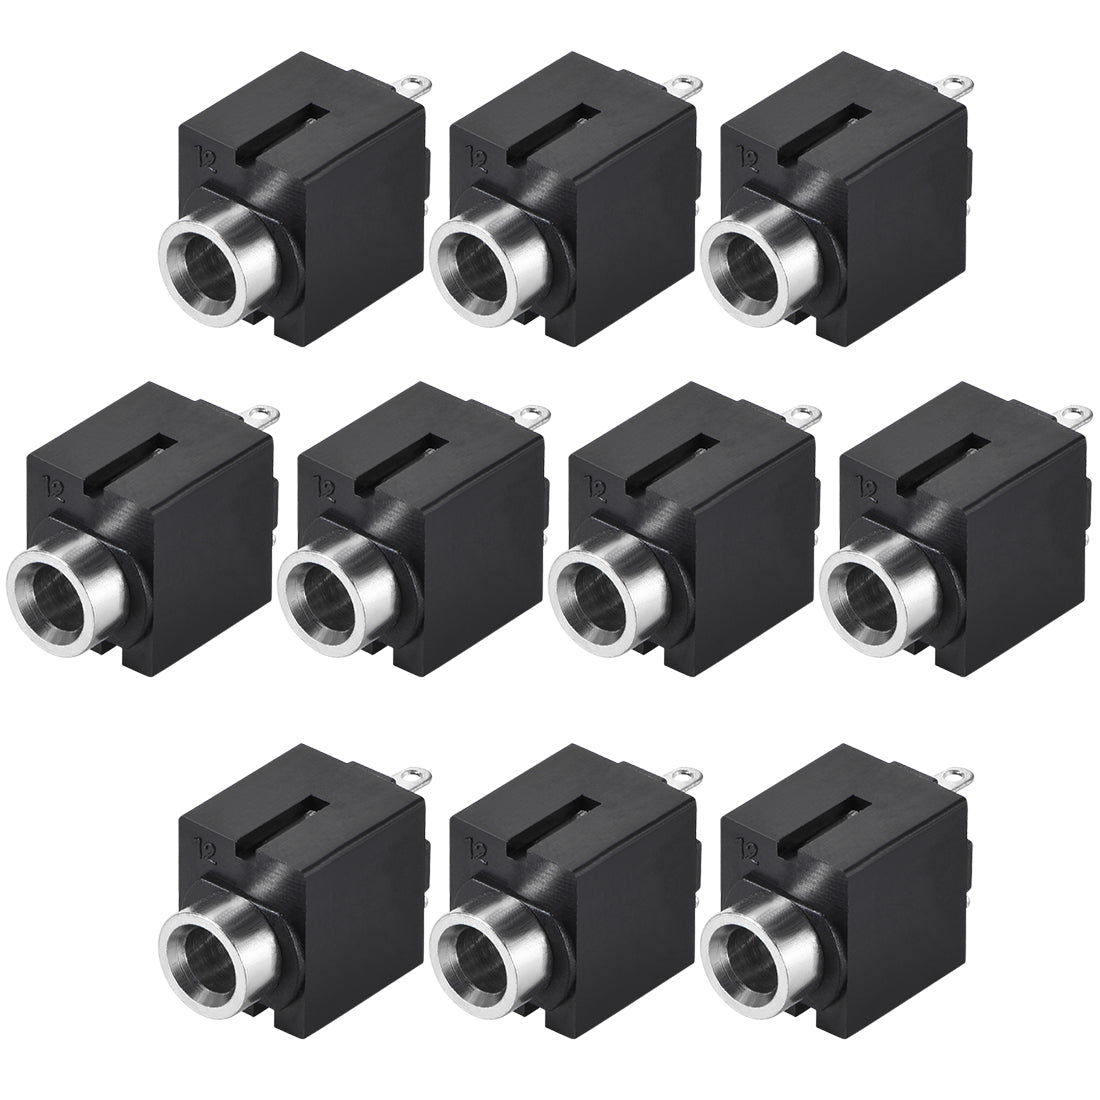 uxcell Uxcell PCB Mount 3.5mm 3 Pin Socket Headphone Stereo Jack Audio Video Connector PJ301C Black 10Pcs